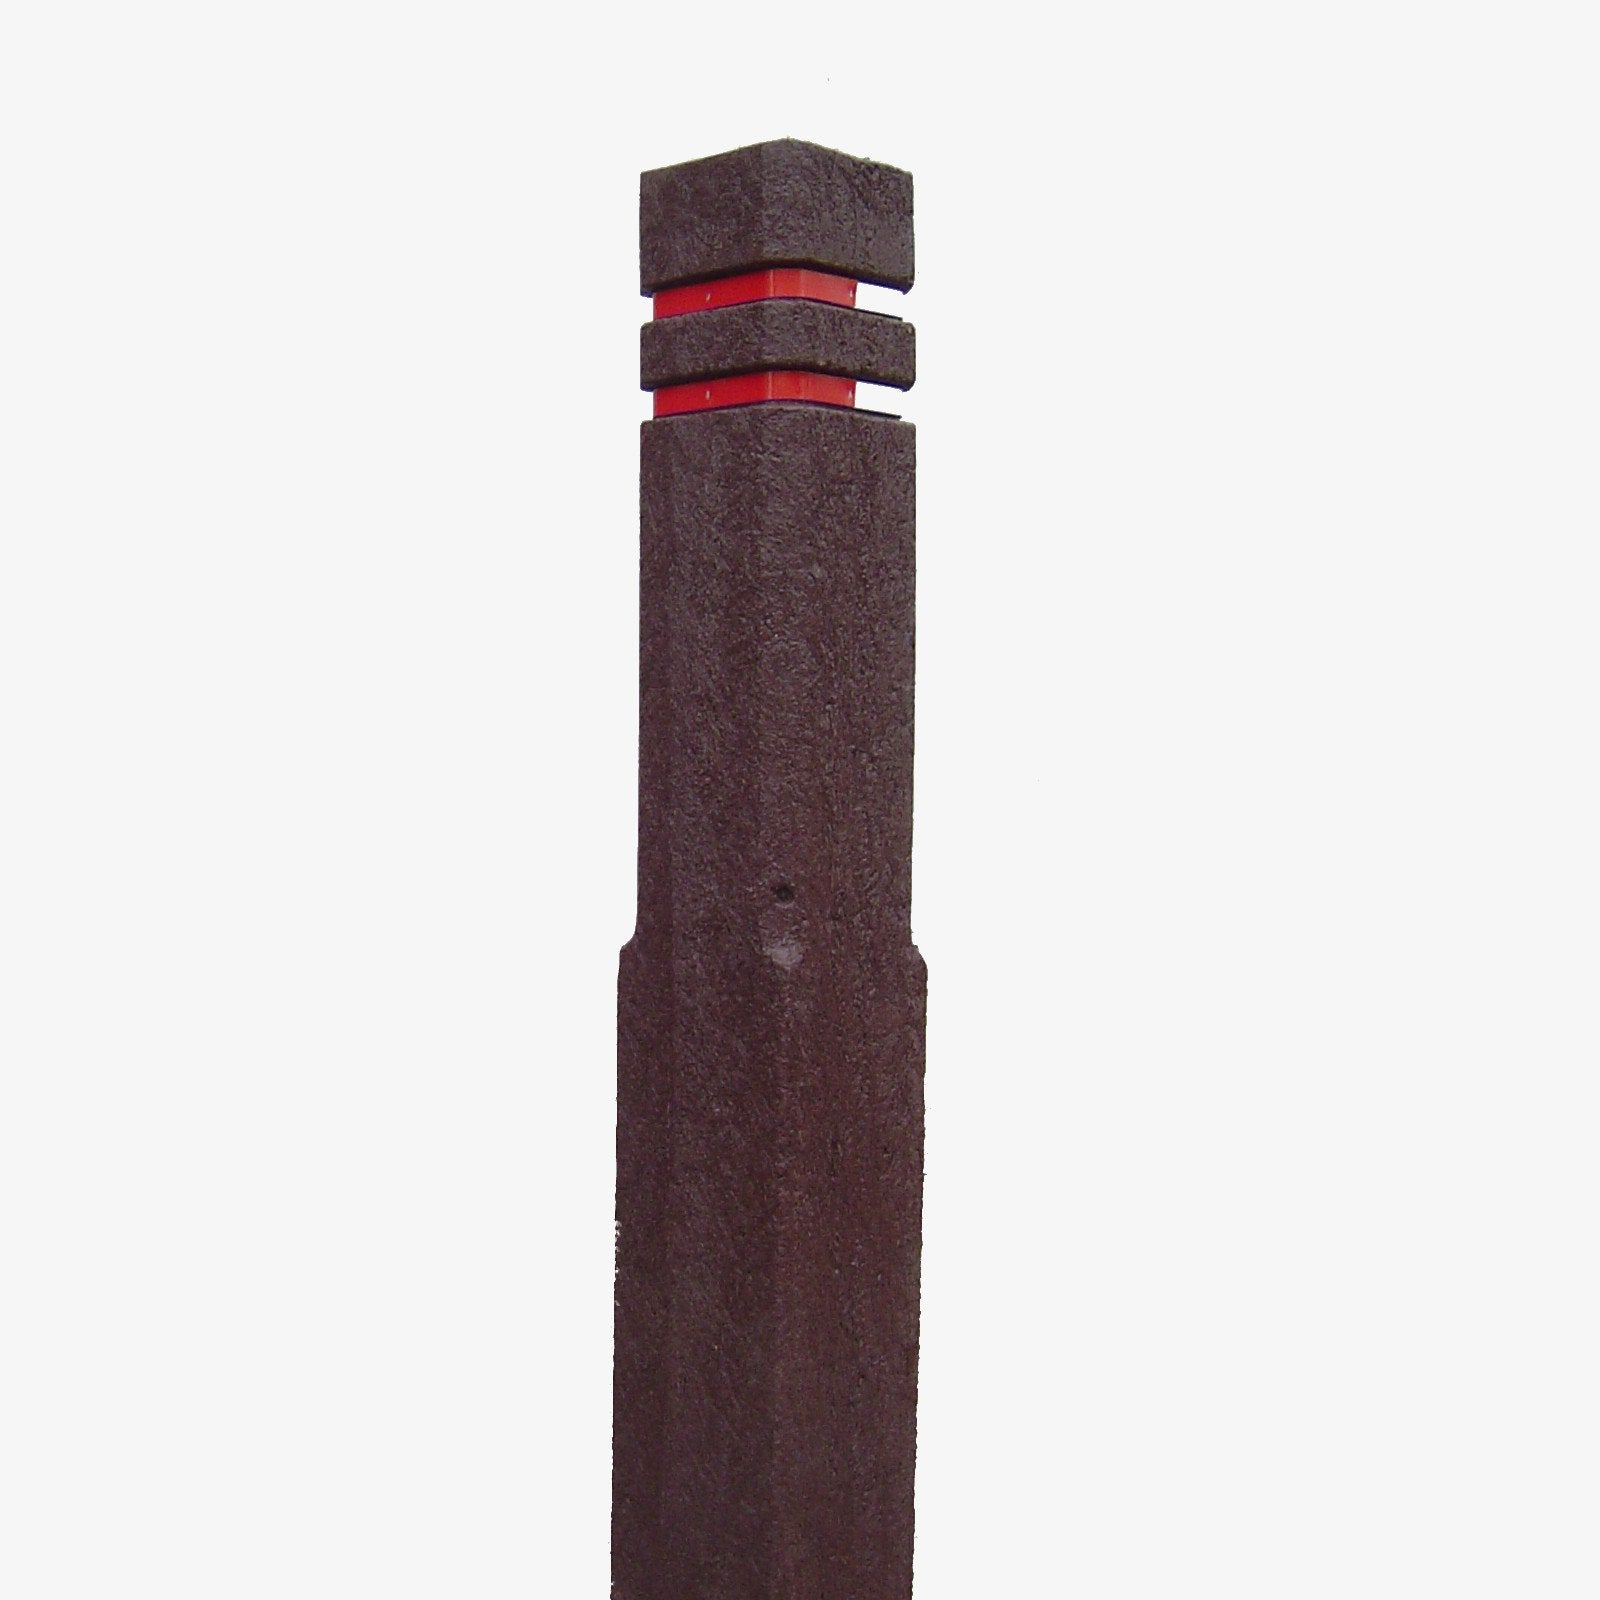 Square Bollard - 2 Red Bands - Brown